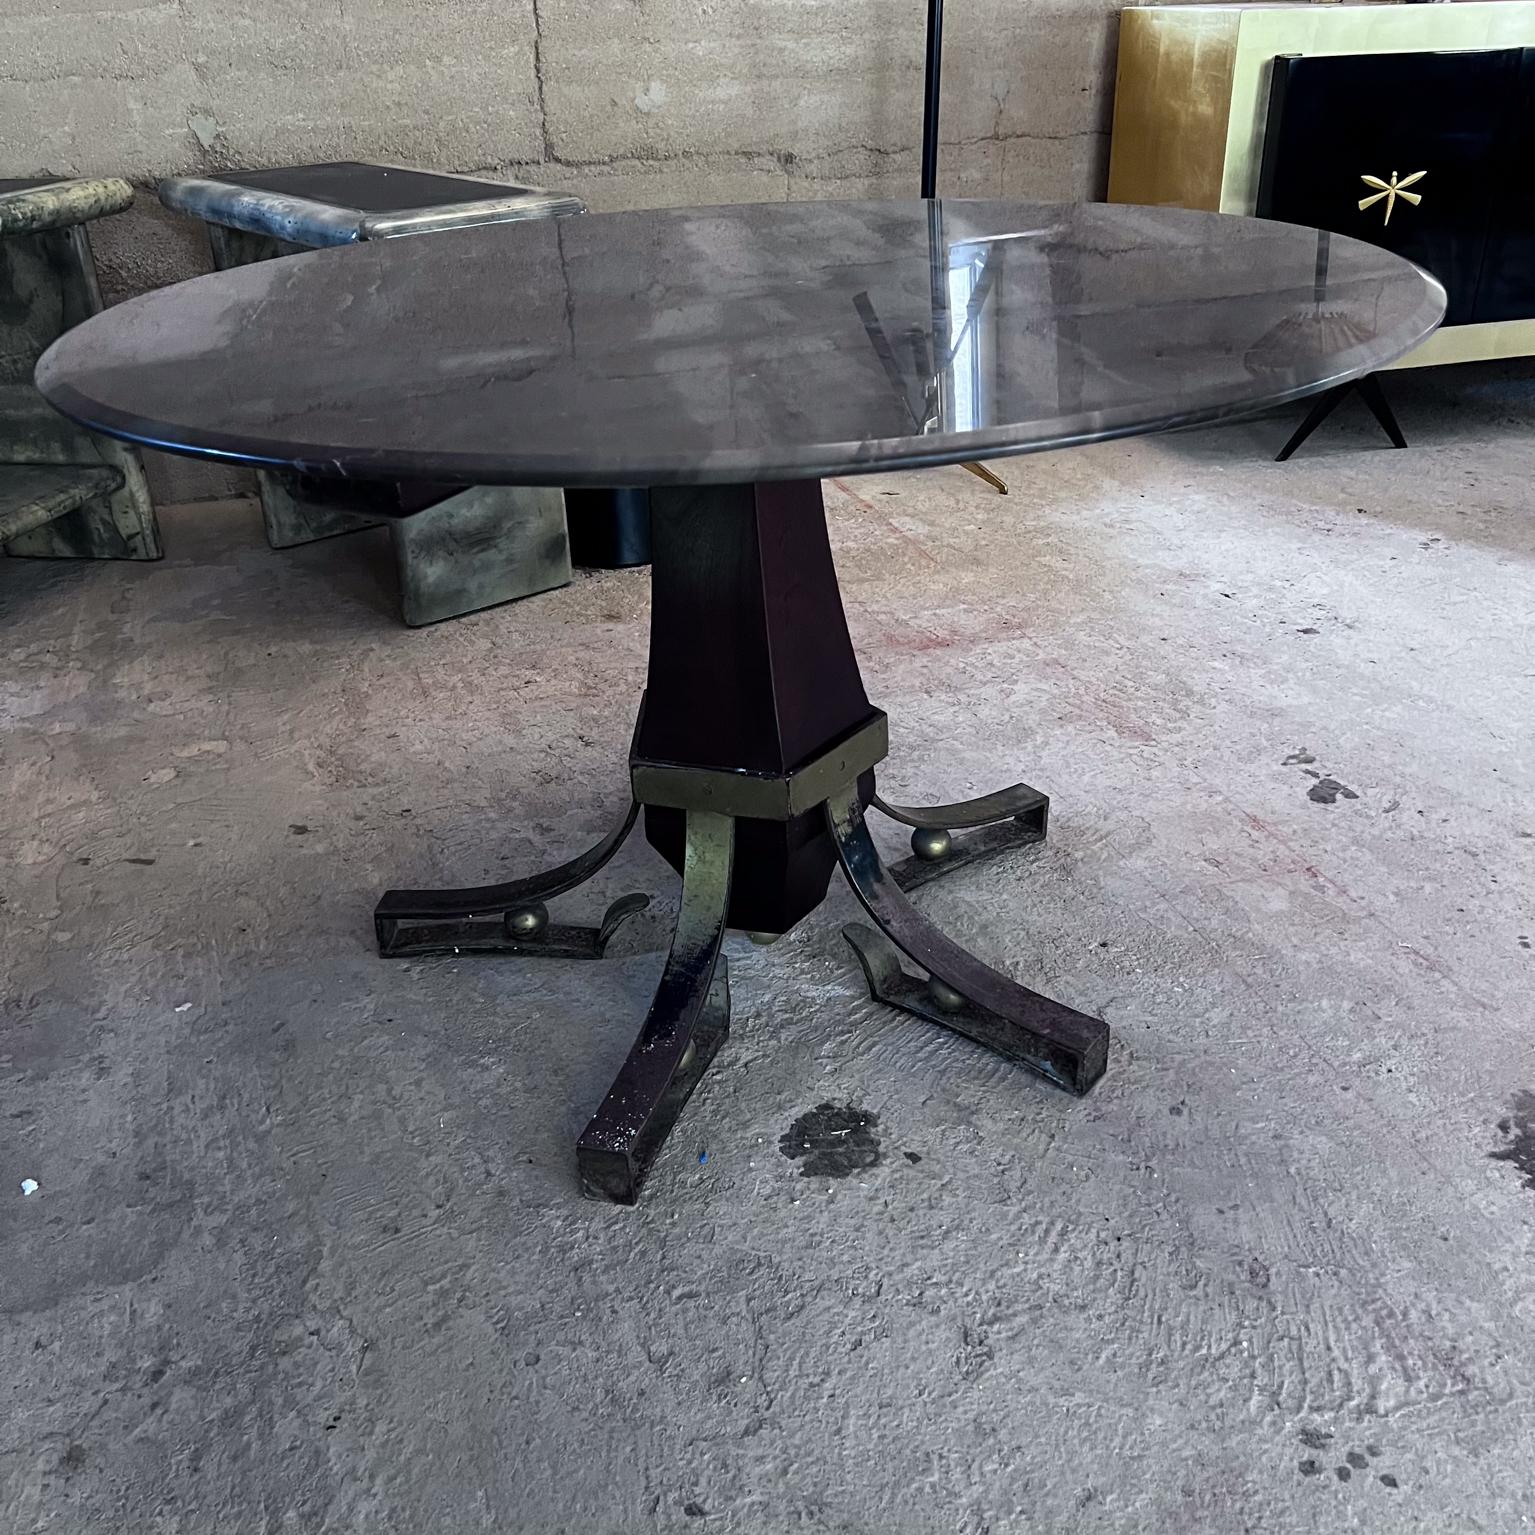 1950s Arturo Pani Forged Iron Mahogany Marble Dining Table Mexico City For Sale 8